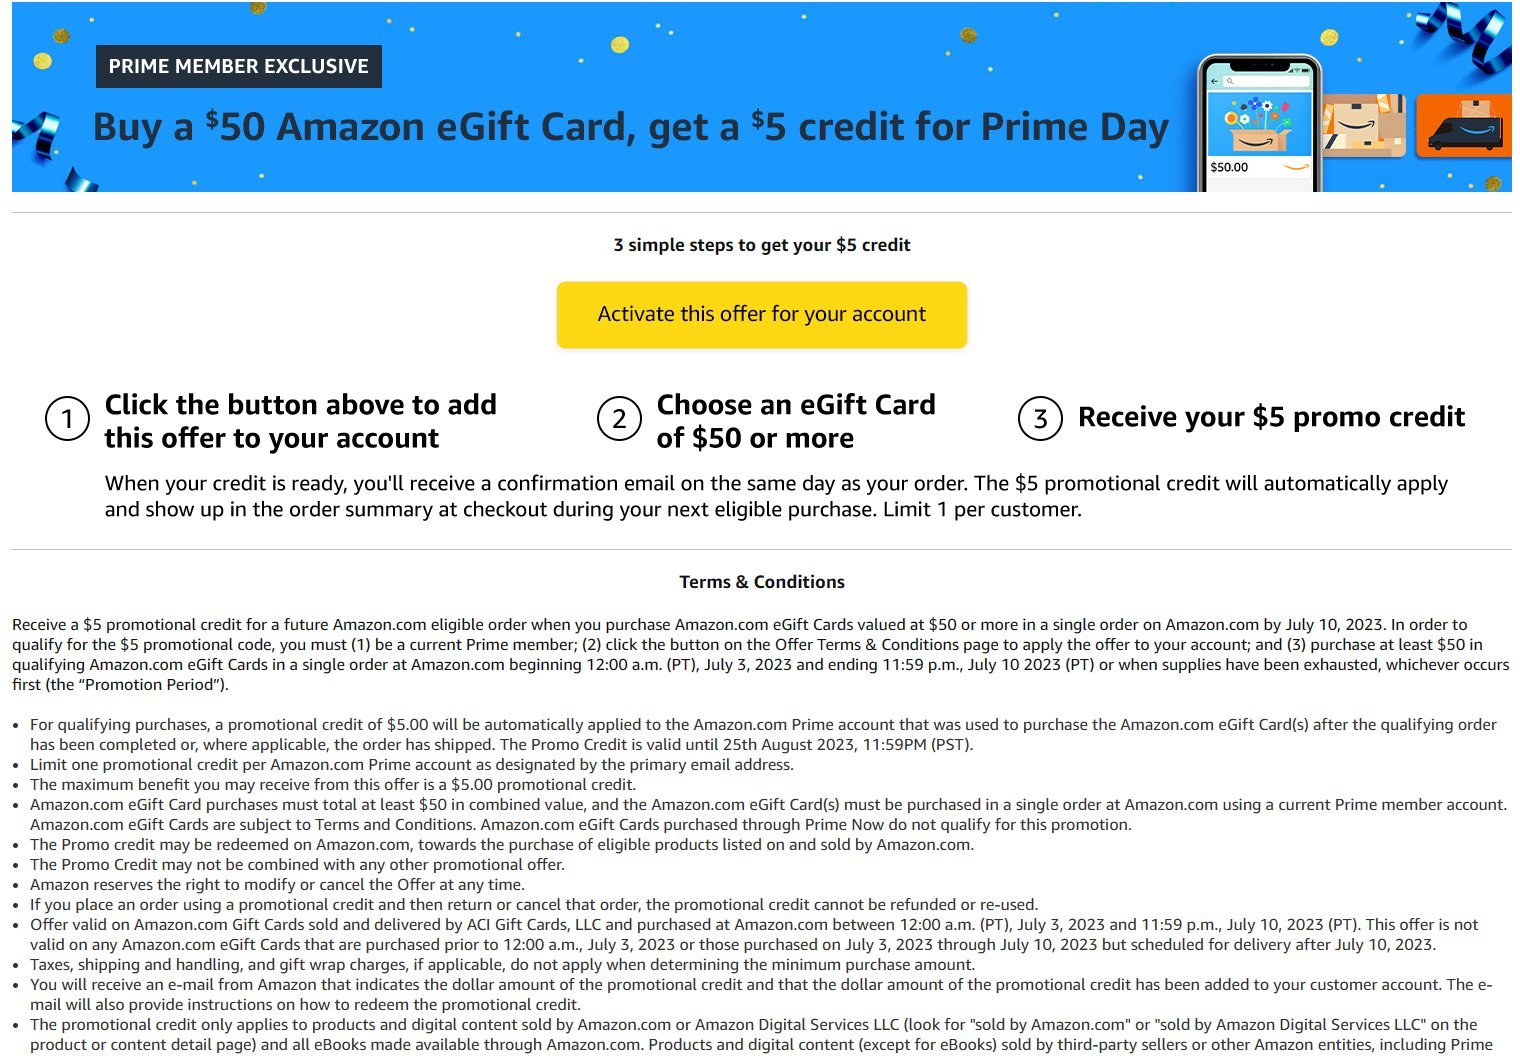 HURRY! Buy A $100 Nordstrom Gift Card And Receive A $20 Amazon Promo Code!  - DansDeals.com